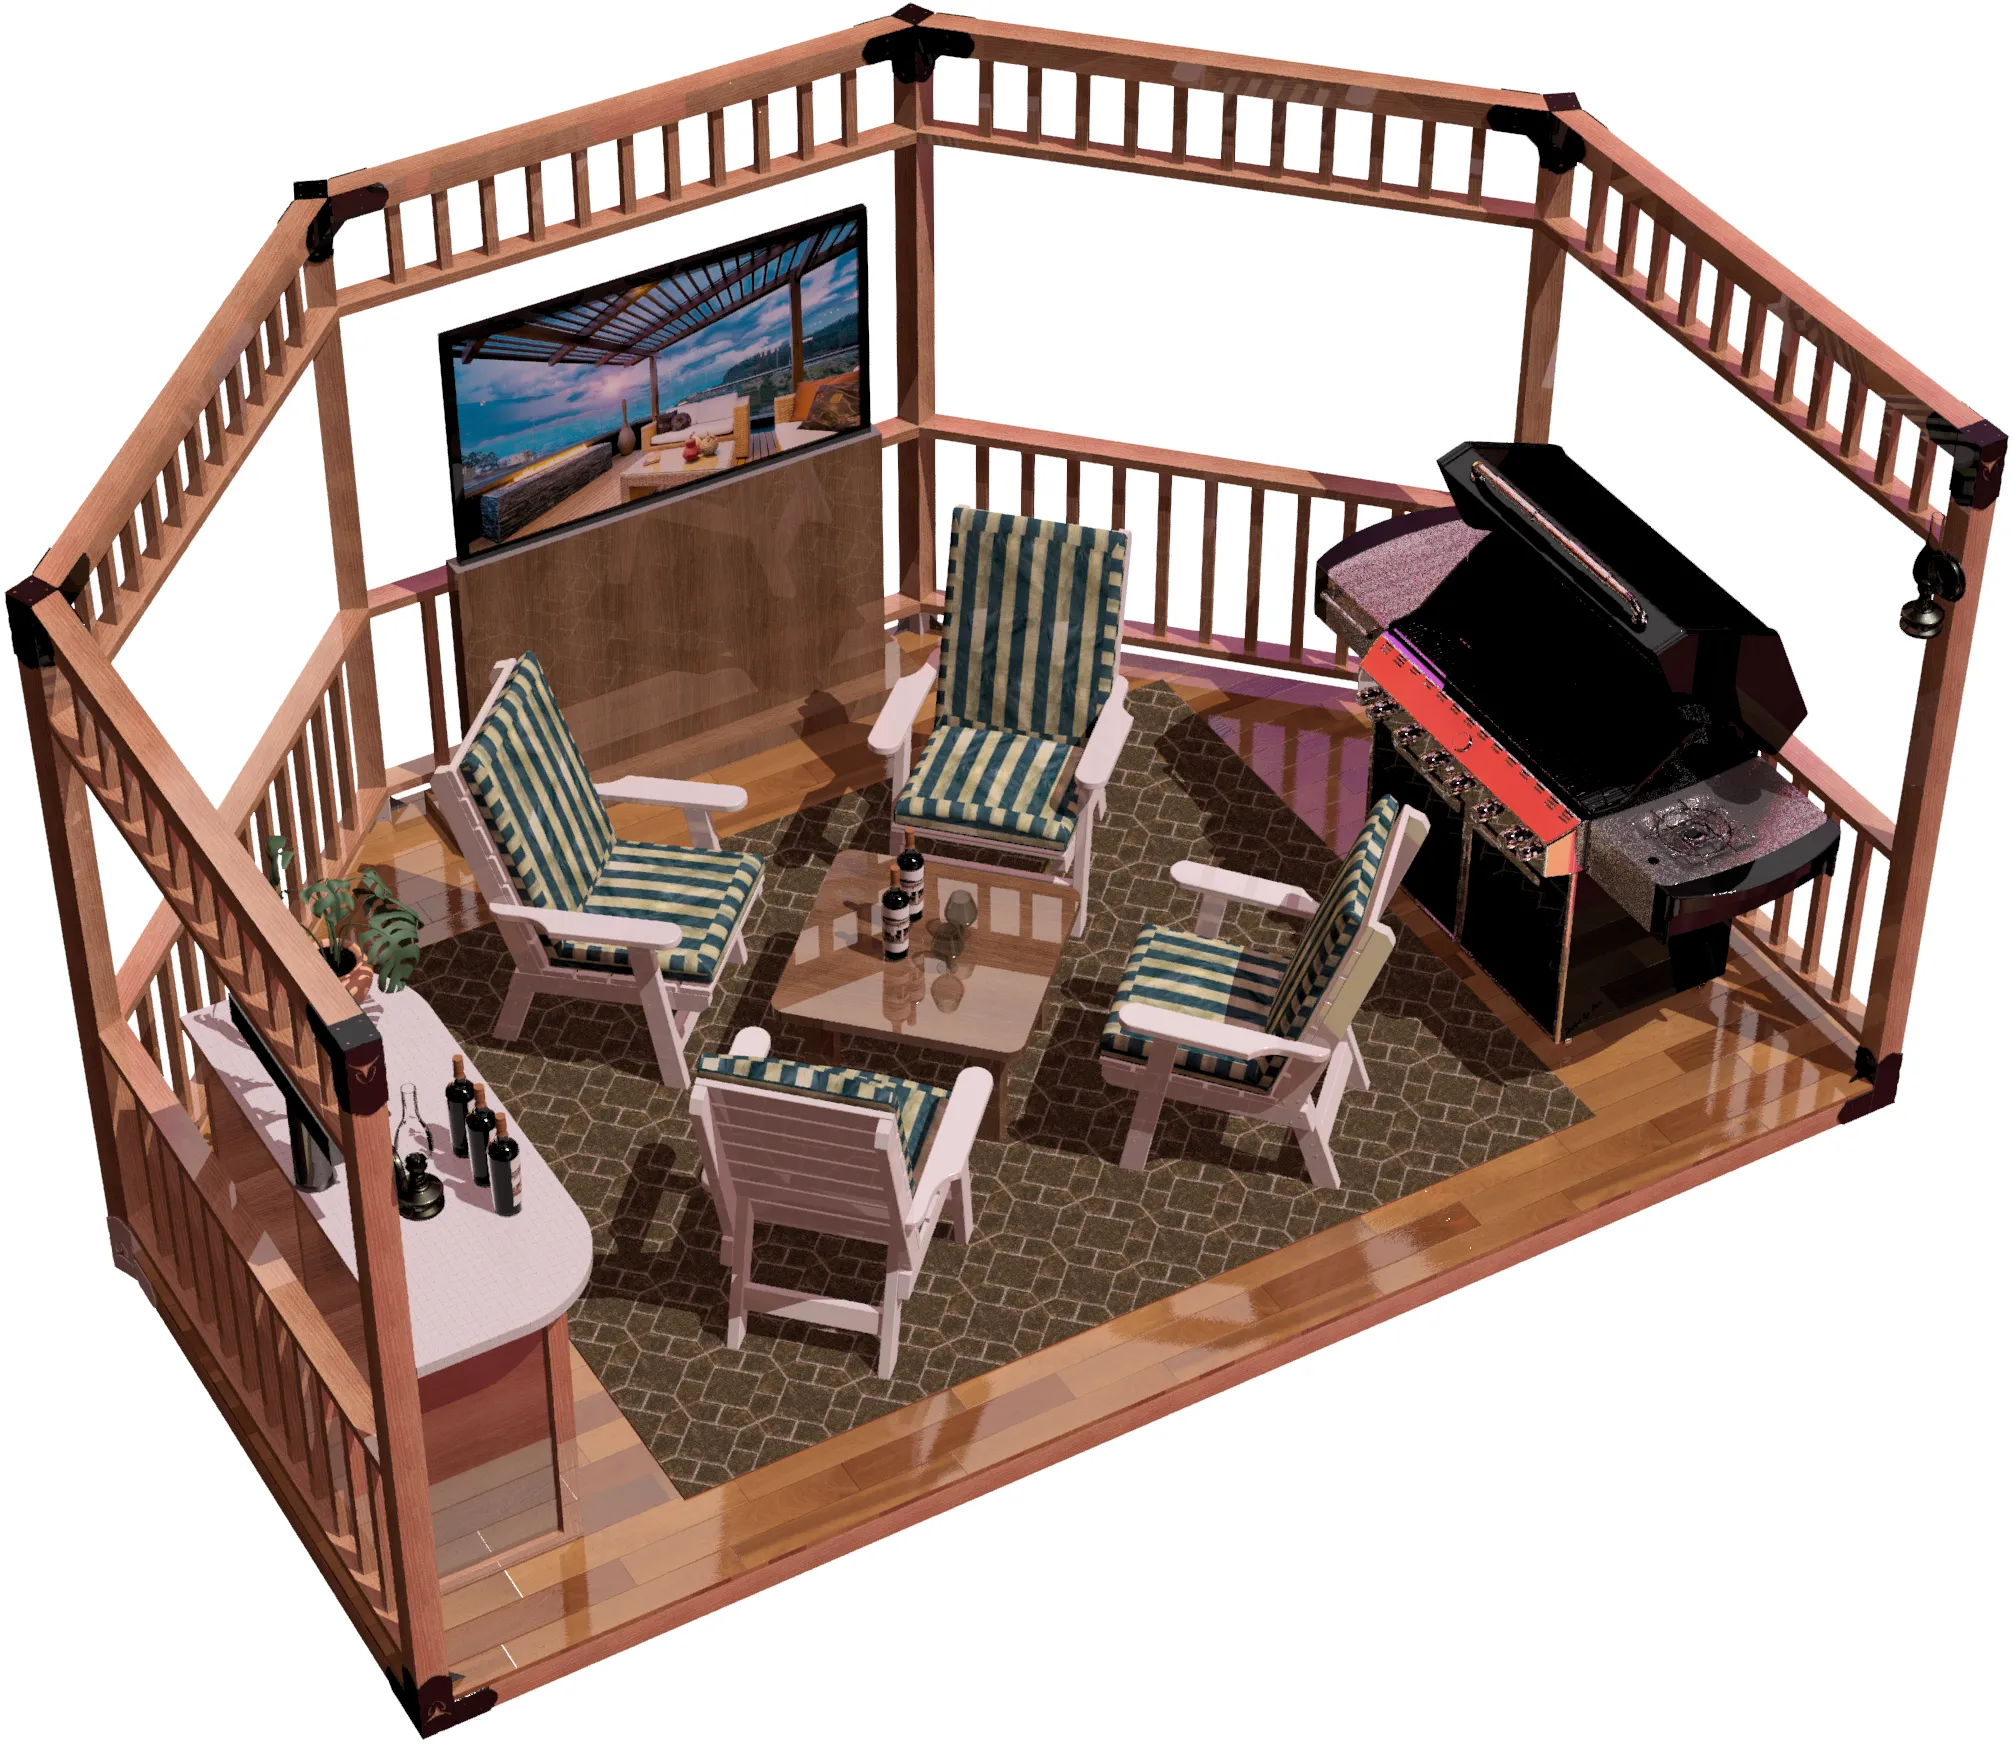 view of a DIY 4x4, floating deck, open top partial octagon pergola. A bar with beer taps & wine bottles, barbecuer, LED TV, and casual furniture inside it.